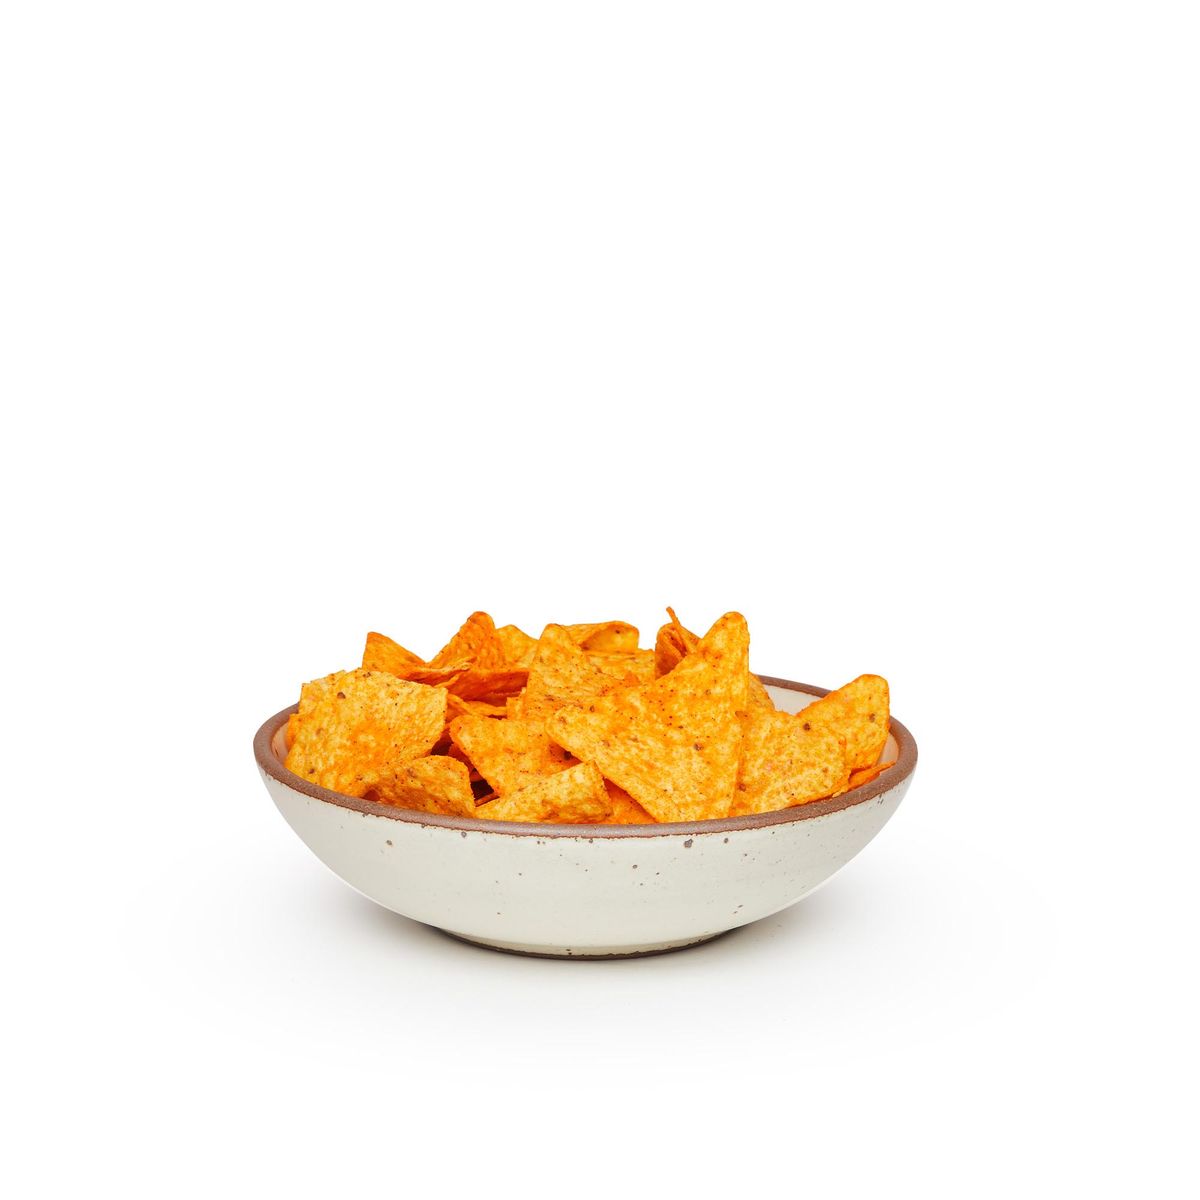 A dinner-sized shallow ceramic bowl in a warm, tan-toned, off-white color featuring iron speckles and an unglazed rim, filled with chips